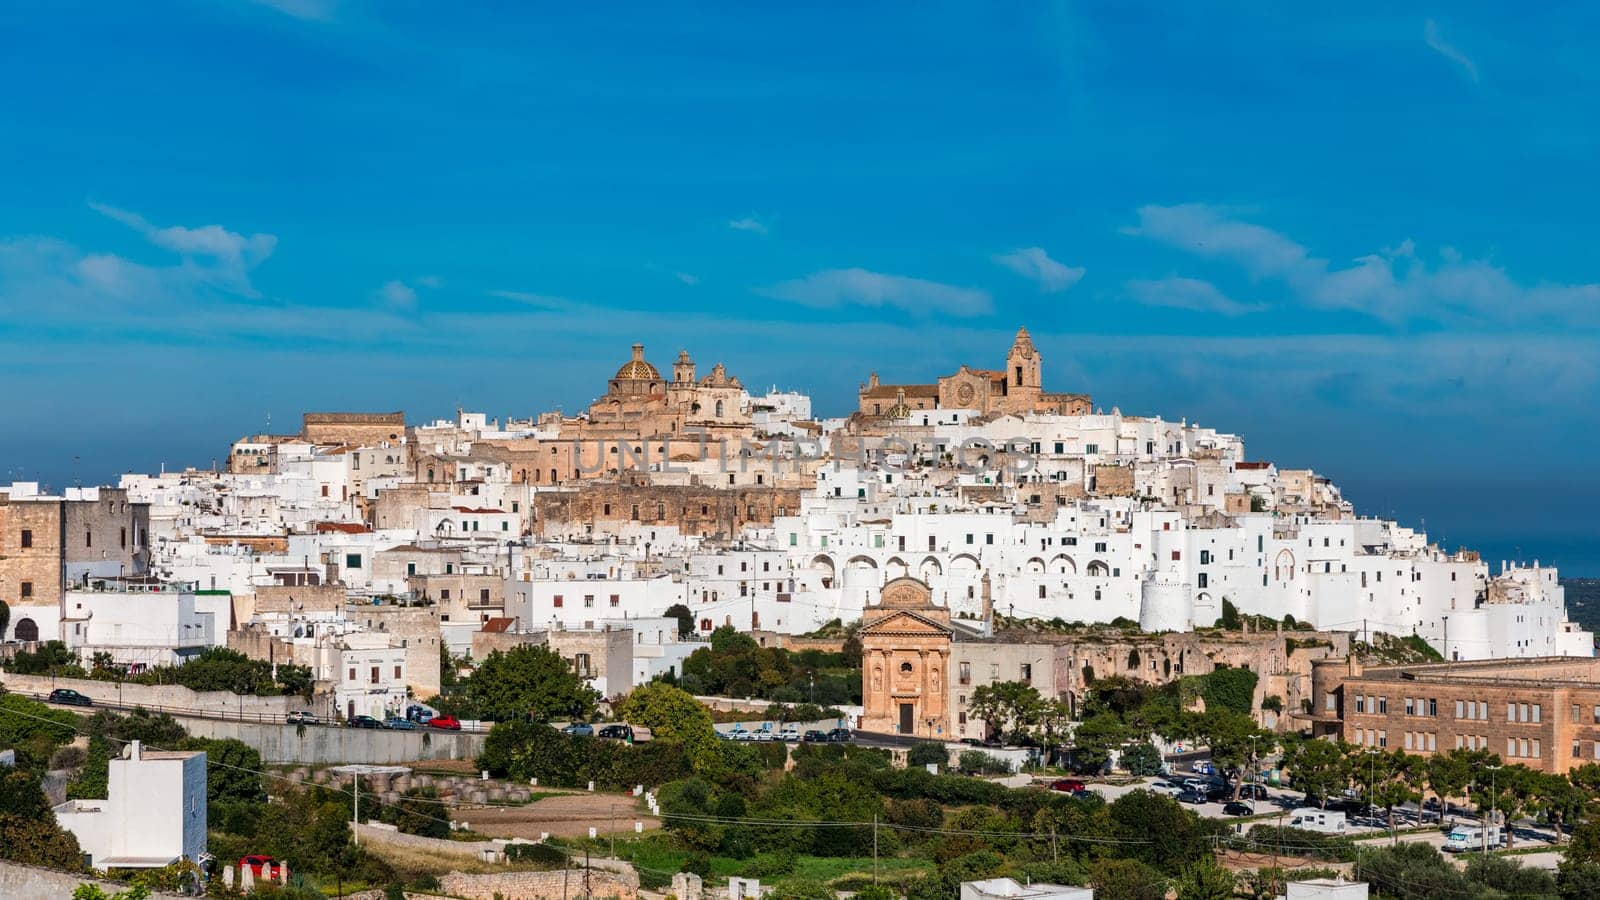 View of Ostuni white town, Brindisi, Puglia (Apulia), Italy, Europe. Old Town is Ostuni's citadel. Ostuni is referred to as the White Town. Ostuni white town skyline and church, Brindisi, Italy. by DaLiu